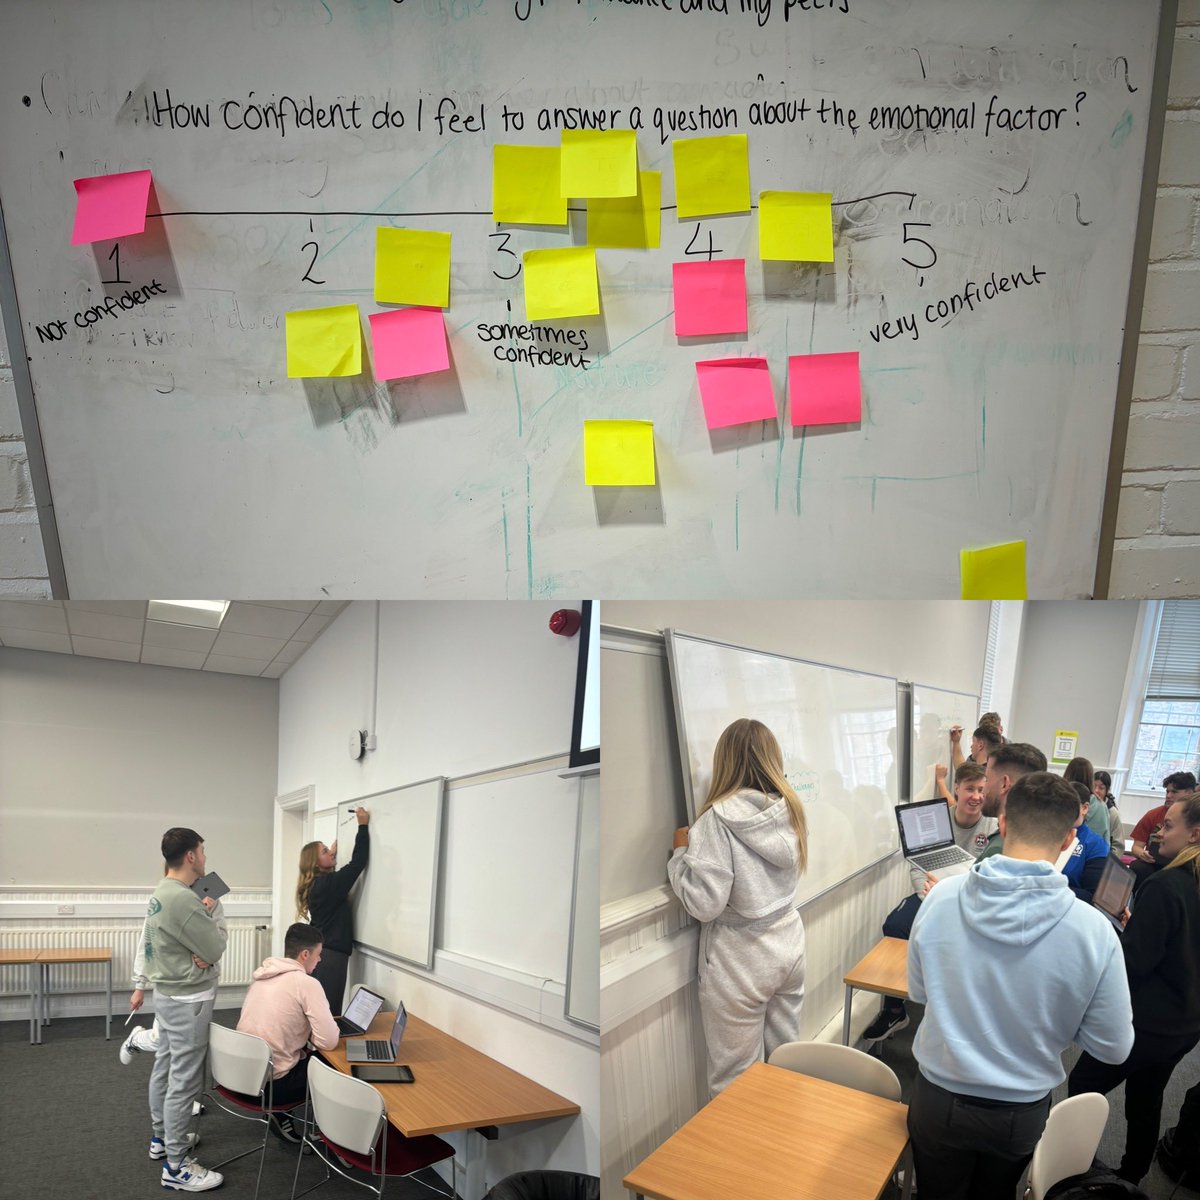 Fantastic start to semester 2 with Year 3 MAPE students. Focusing on experiential learning and formative assessment in NQPE (so far)! Group B have been an absolute joy with their thoughtful discussions and ability to put some of the concepts into practice 😃